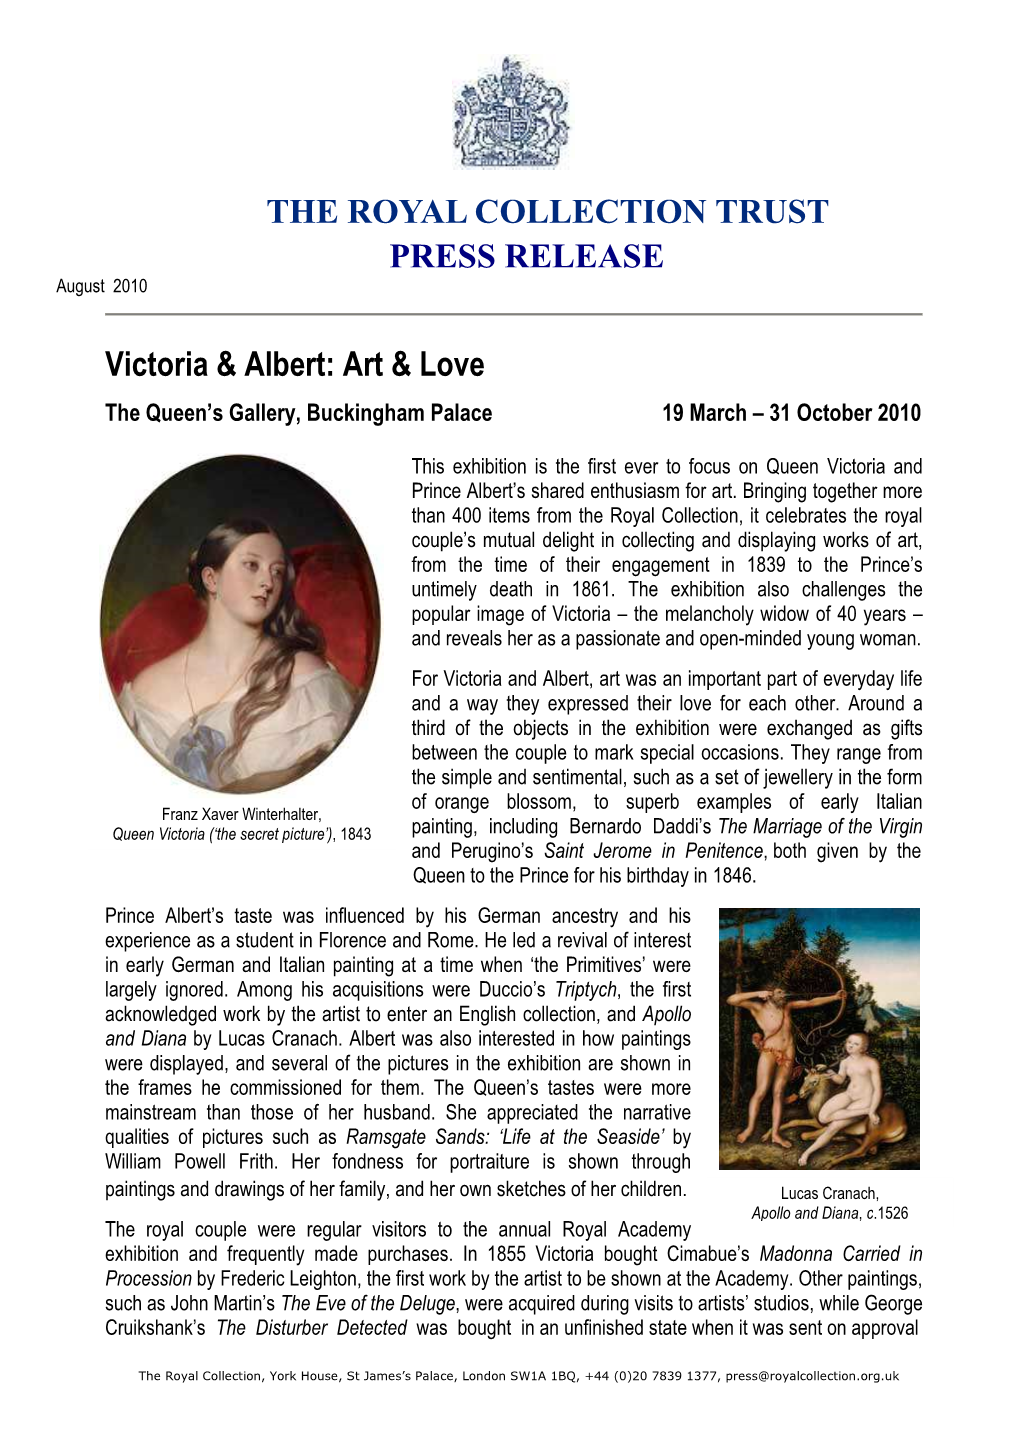 V&A Press Release August 2010